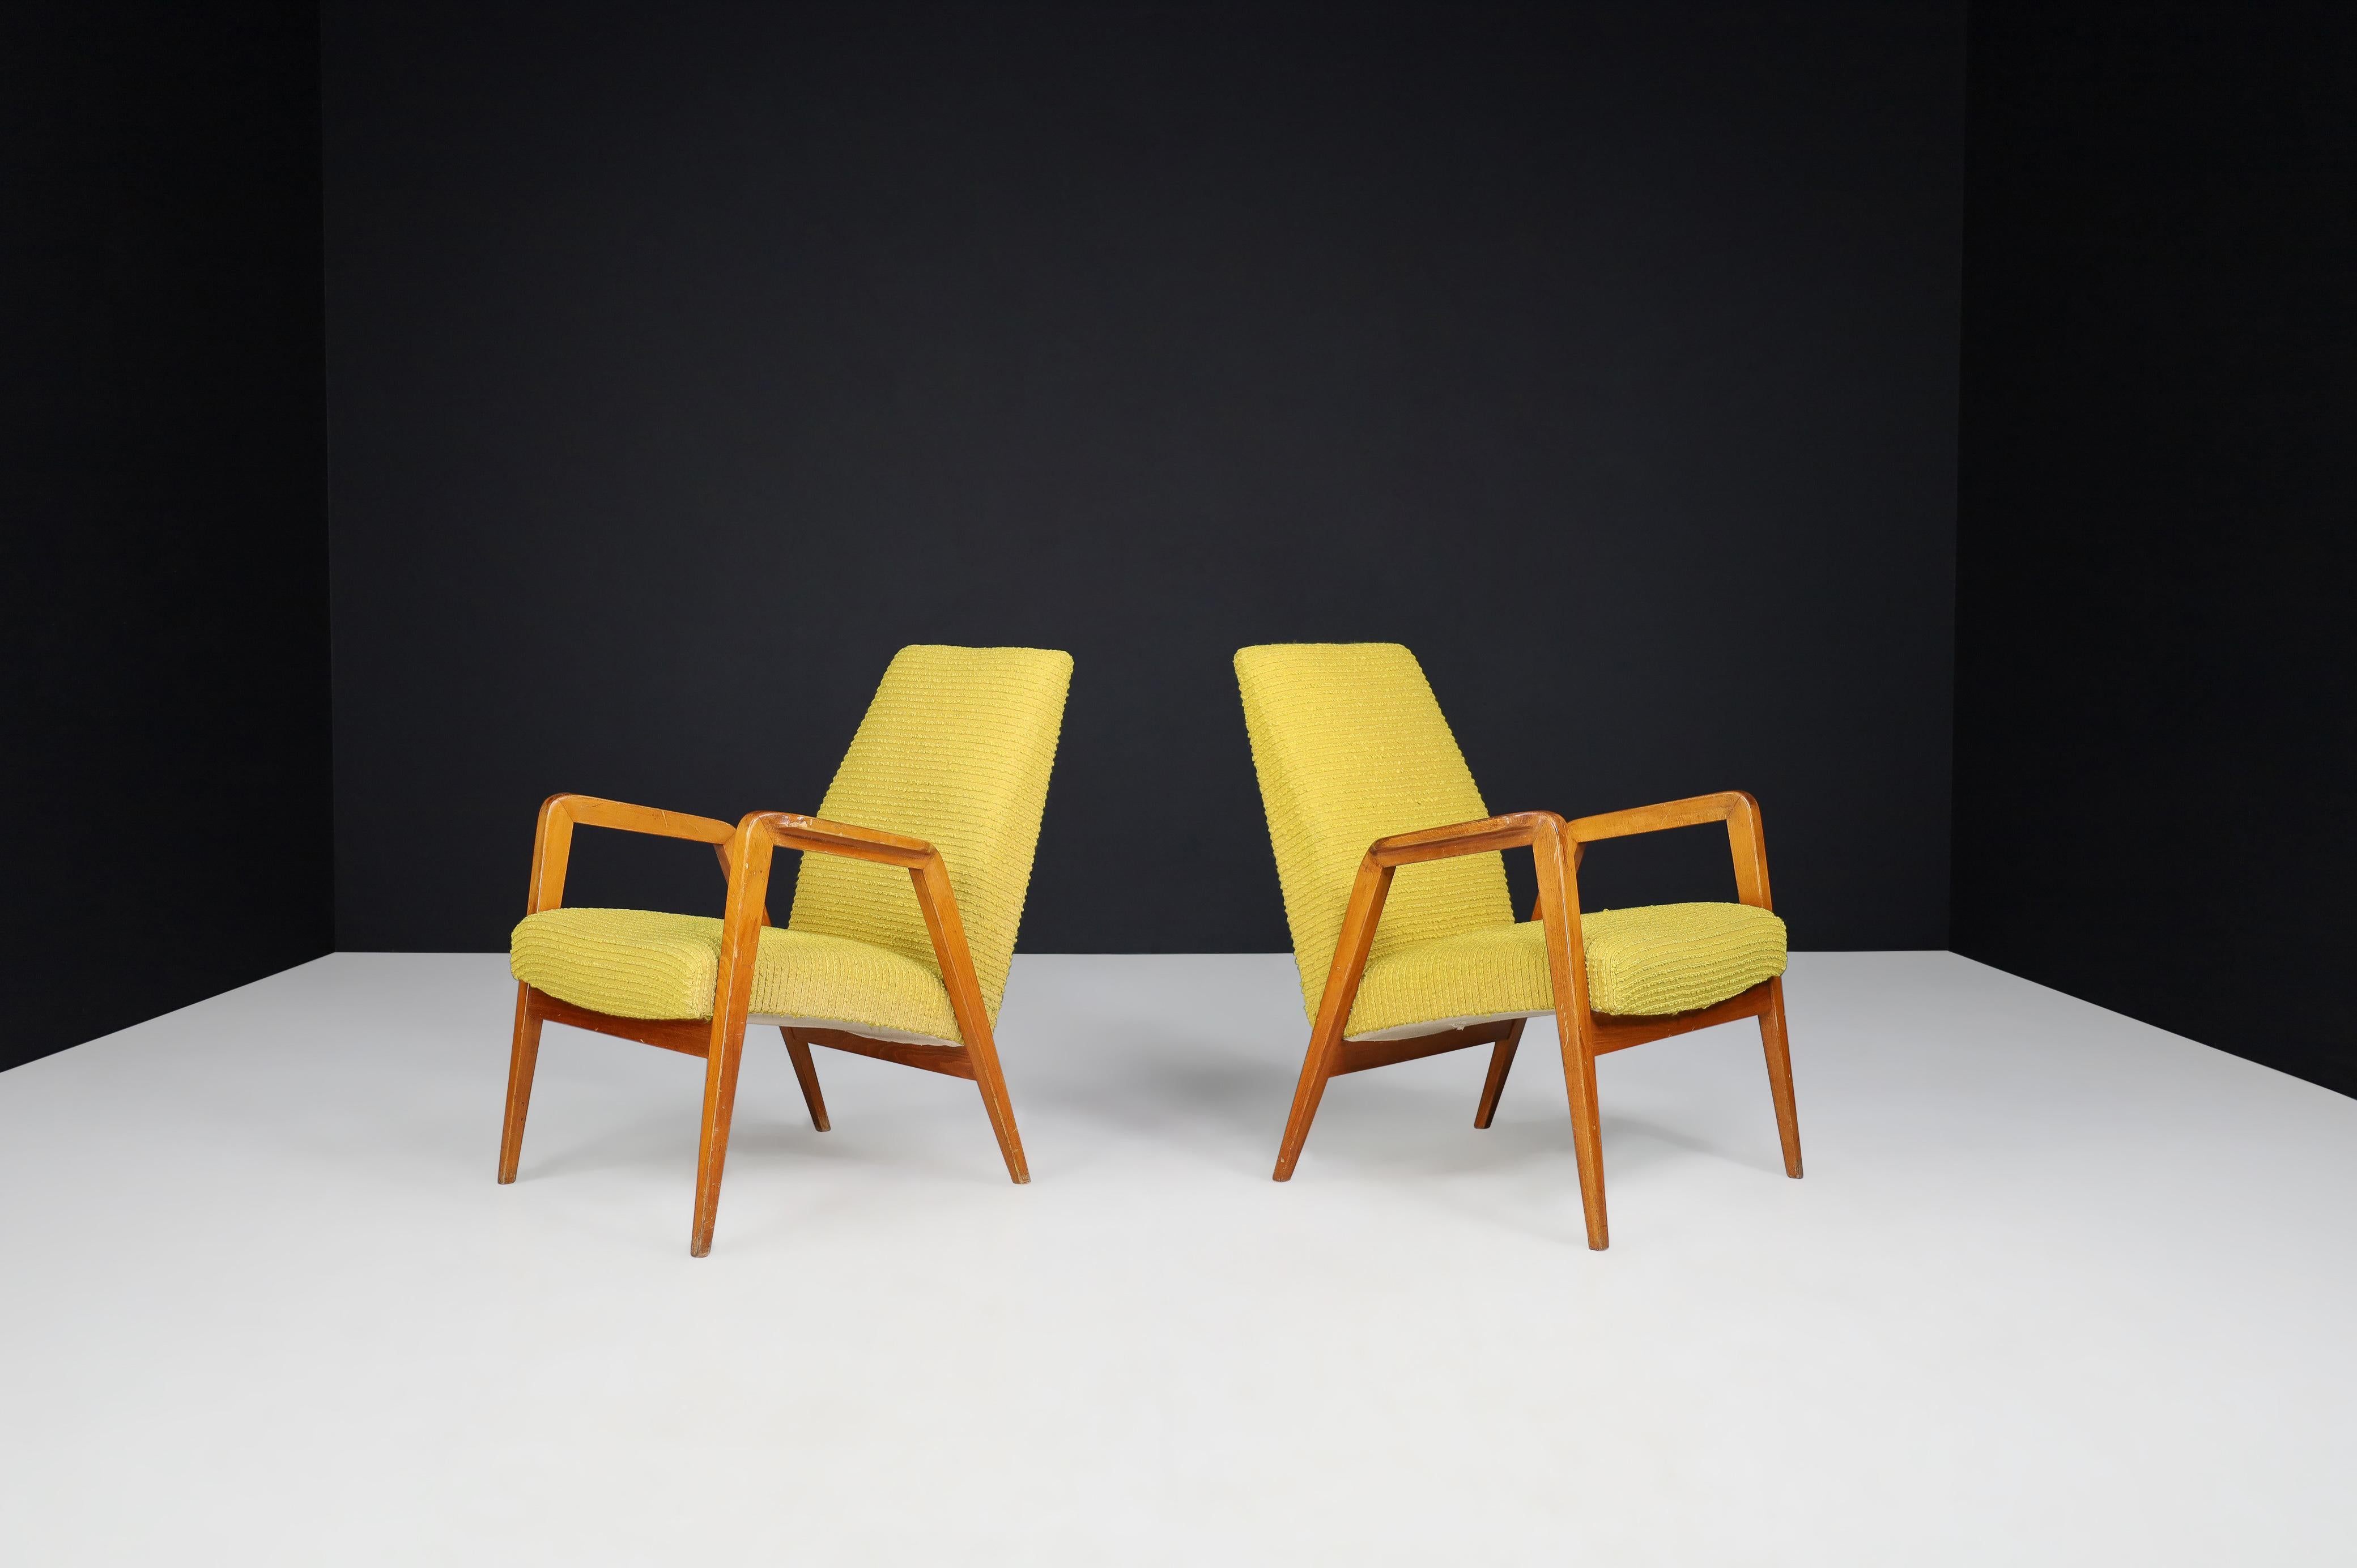 Mid-Century Modern lounge chairs in original lemon upholstery, Praque 1950s 

Mid-Century Modern lounge chairs original lemon upholstery manufactured and designed in Praque 1950s. Their fine lines, armrests, and seating give these armchairs a